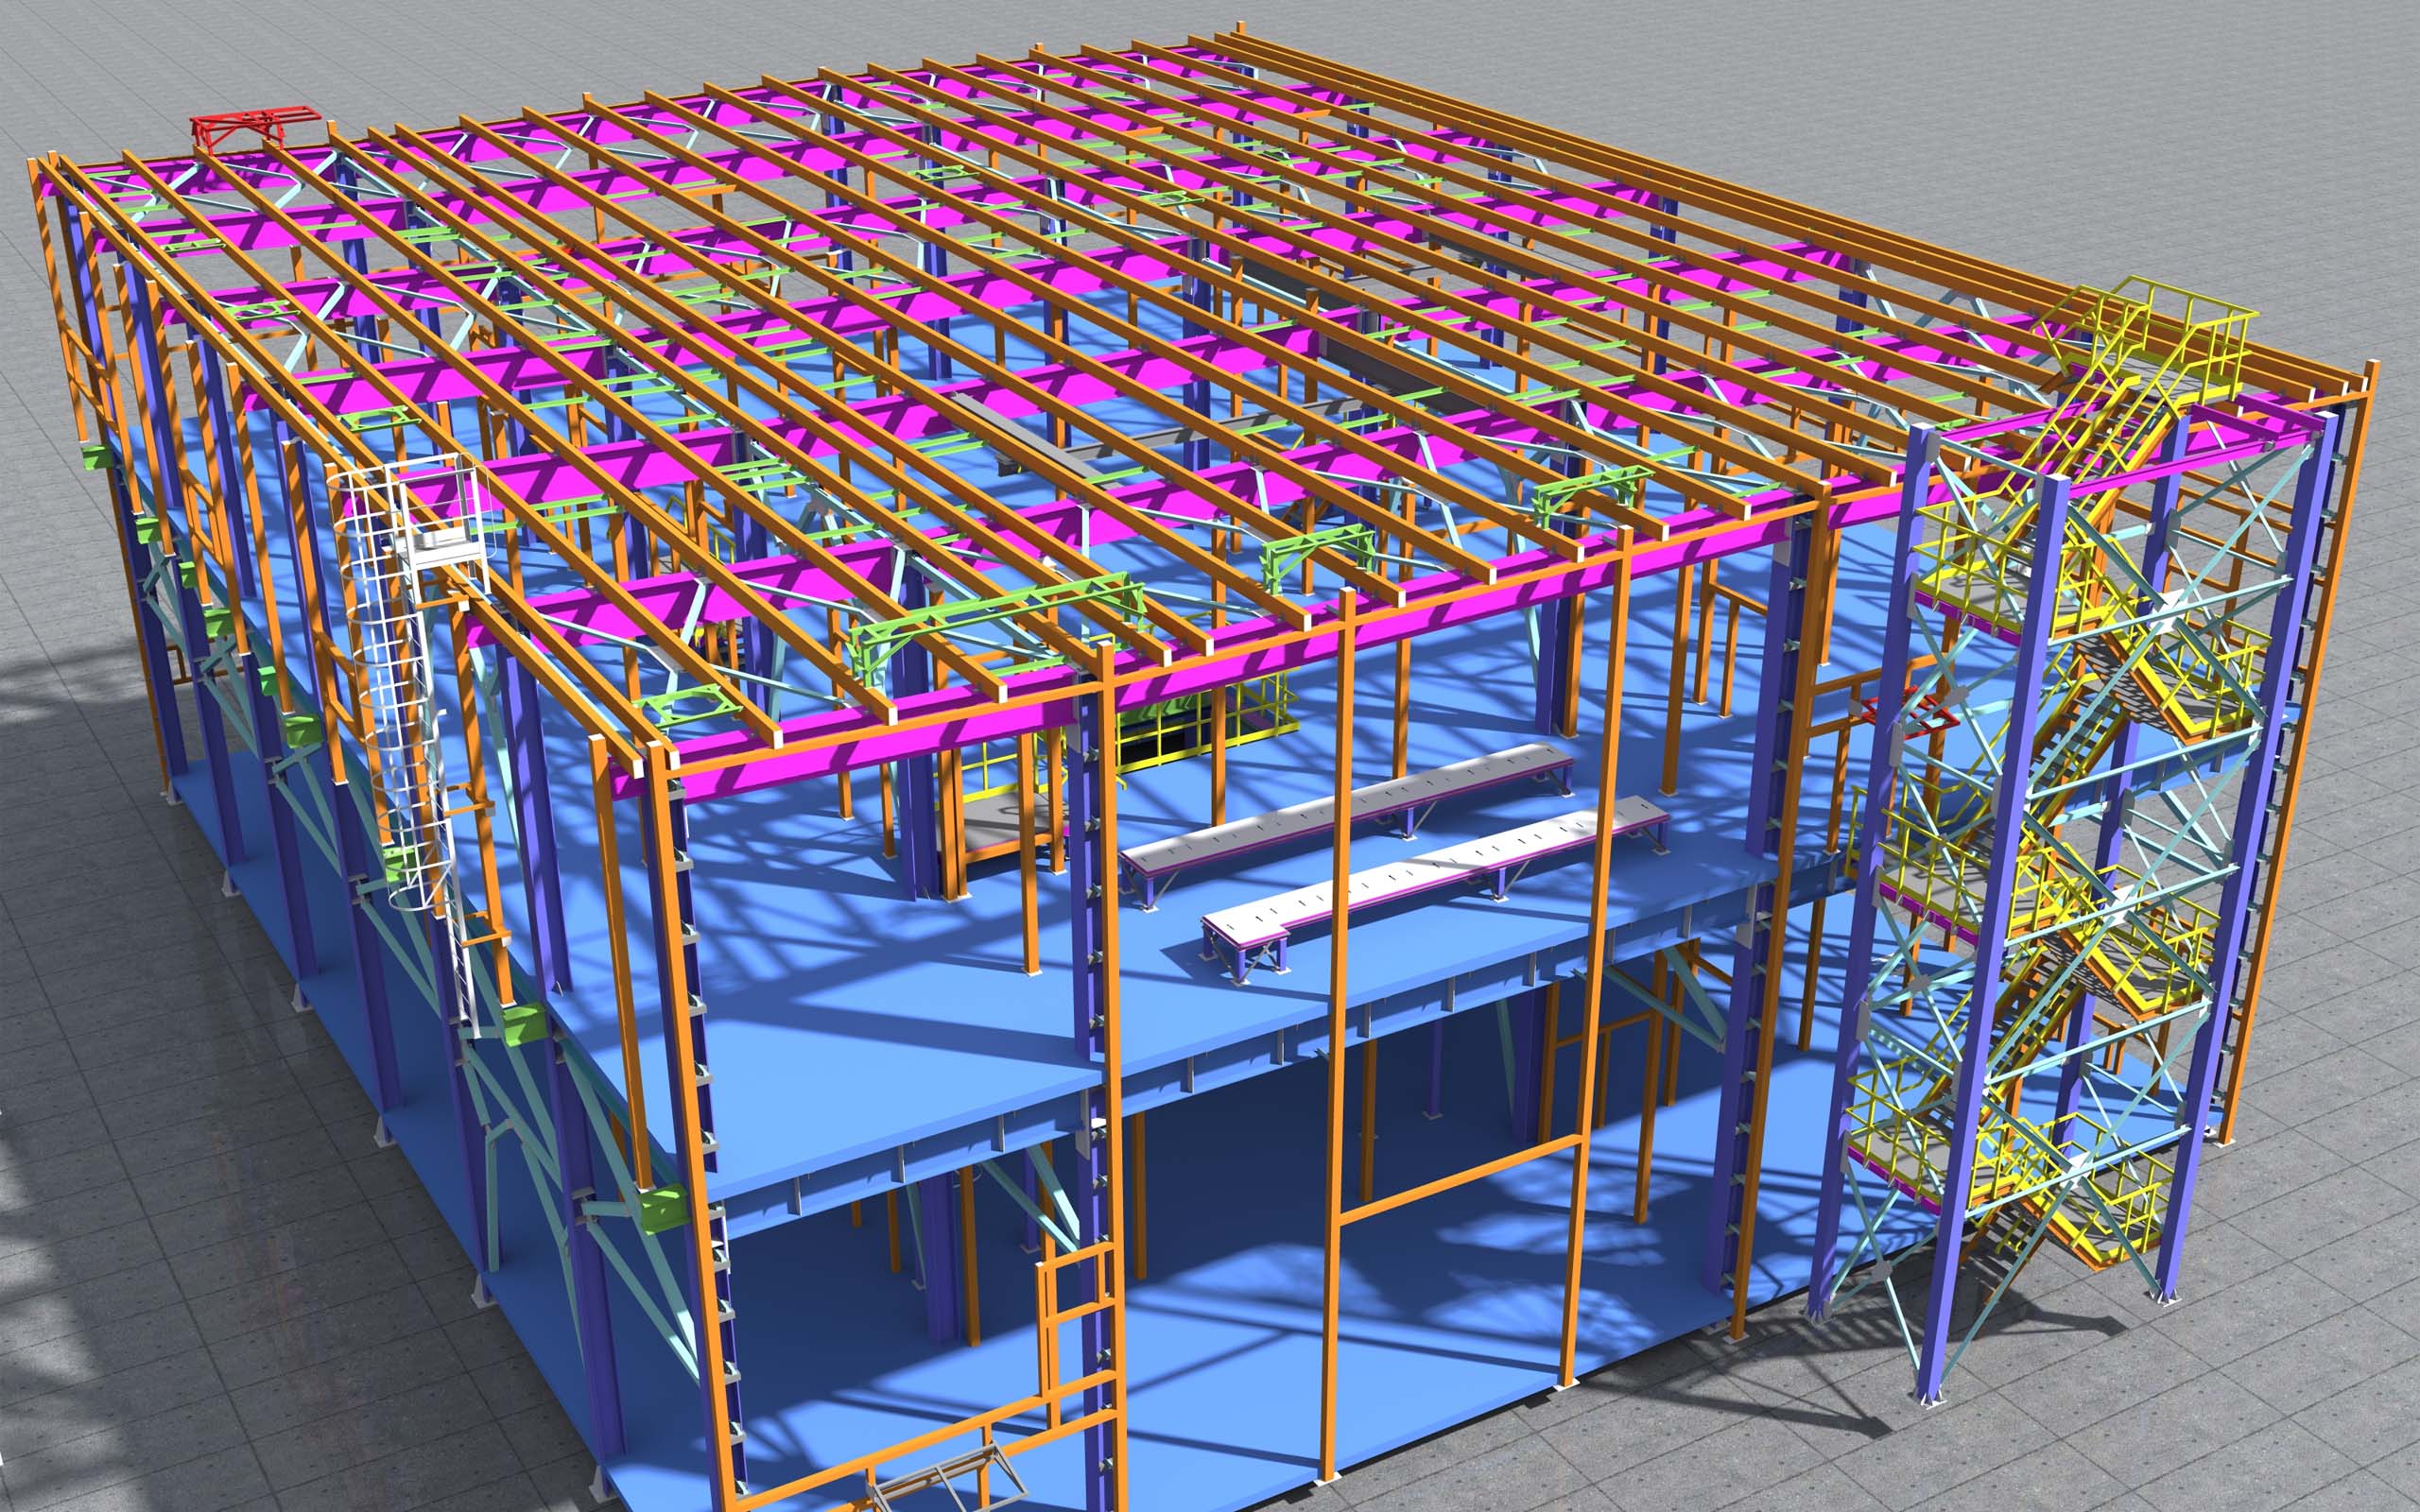 Key Players Driving Growth in the BIM Industry